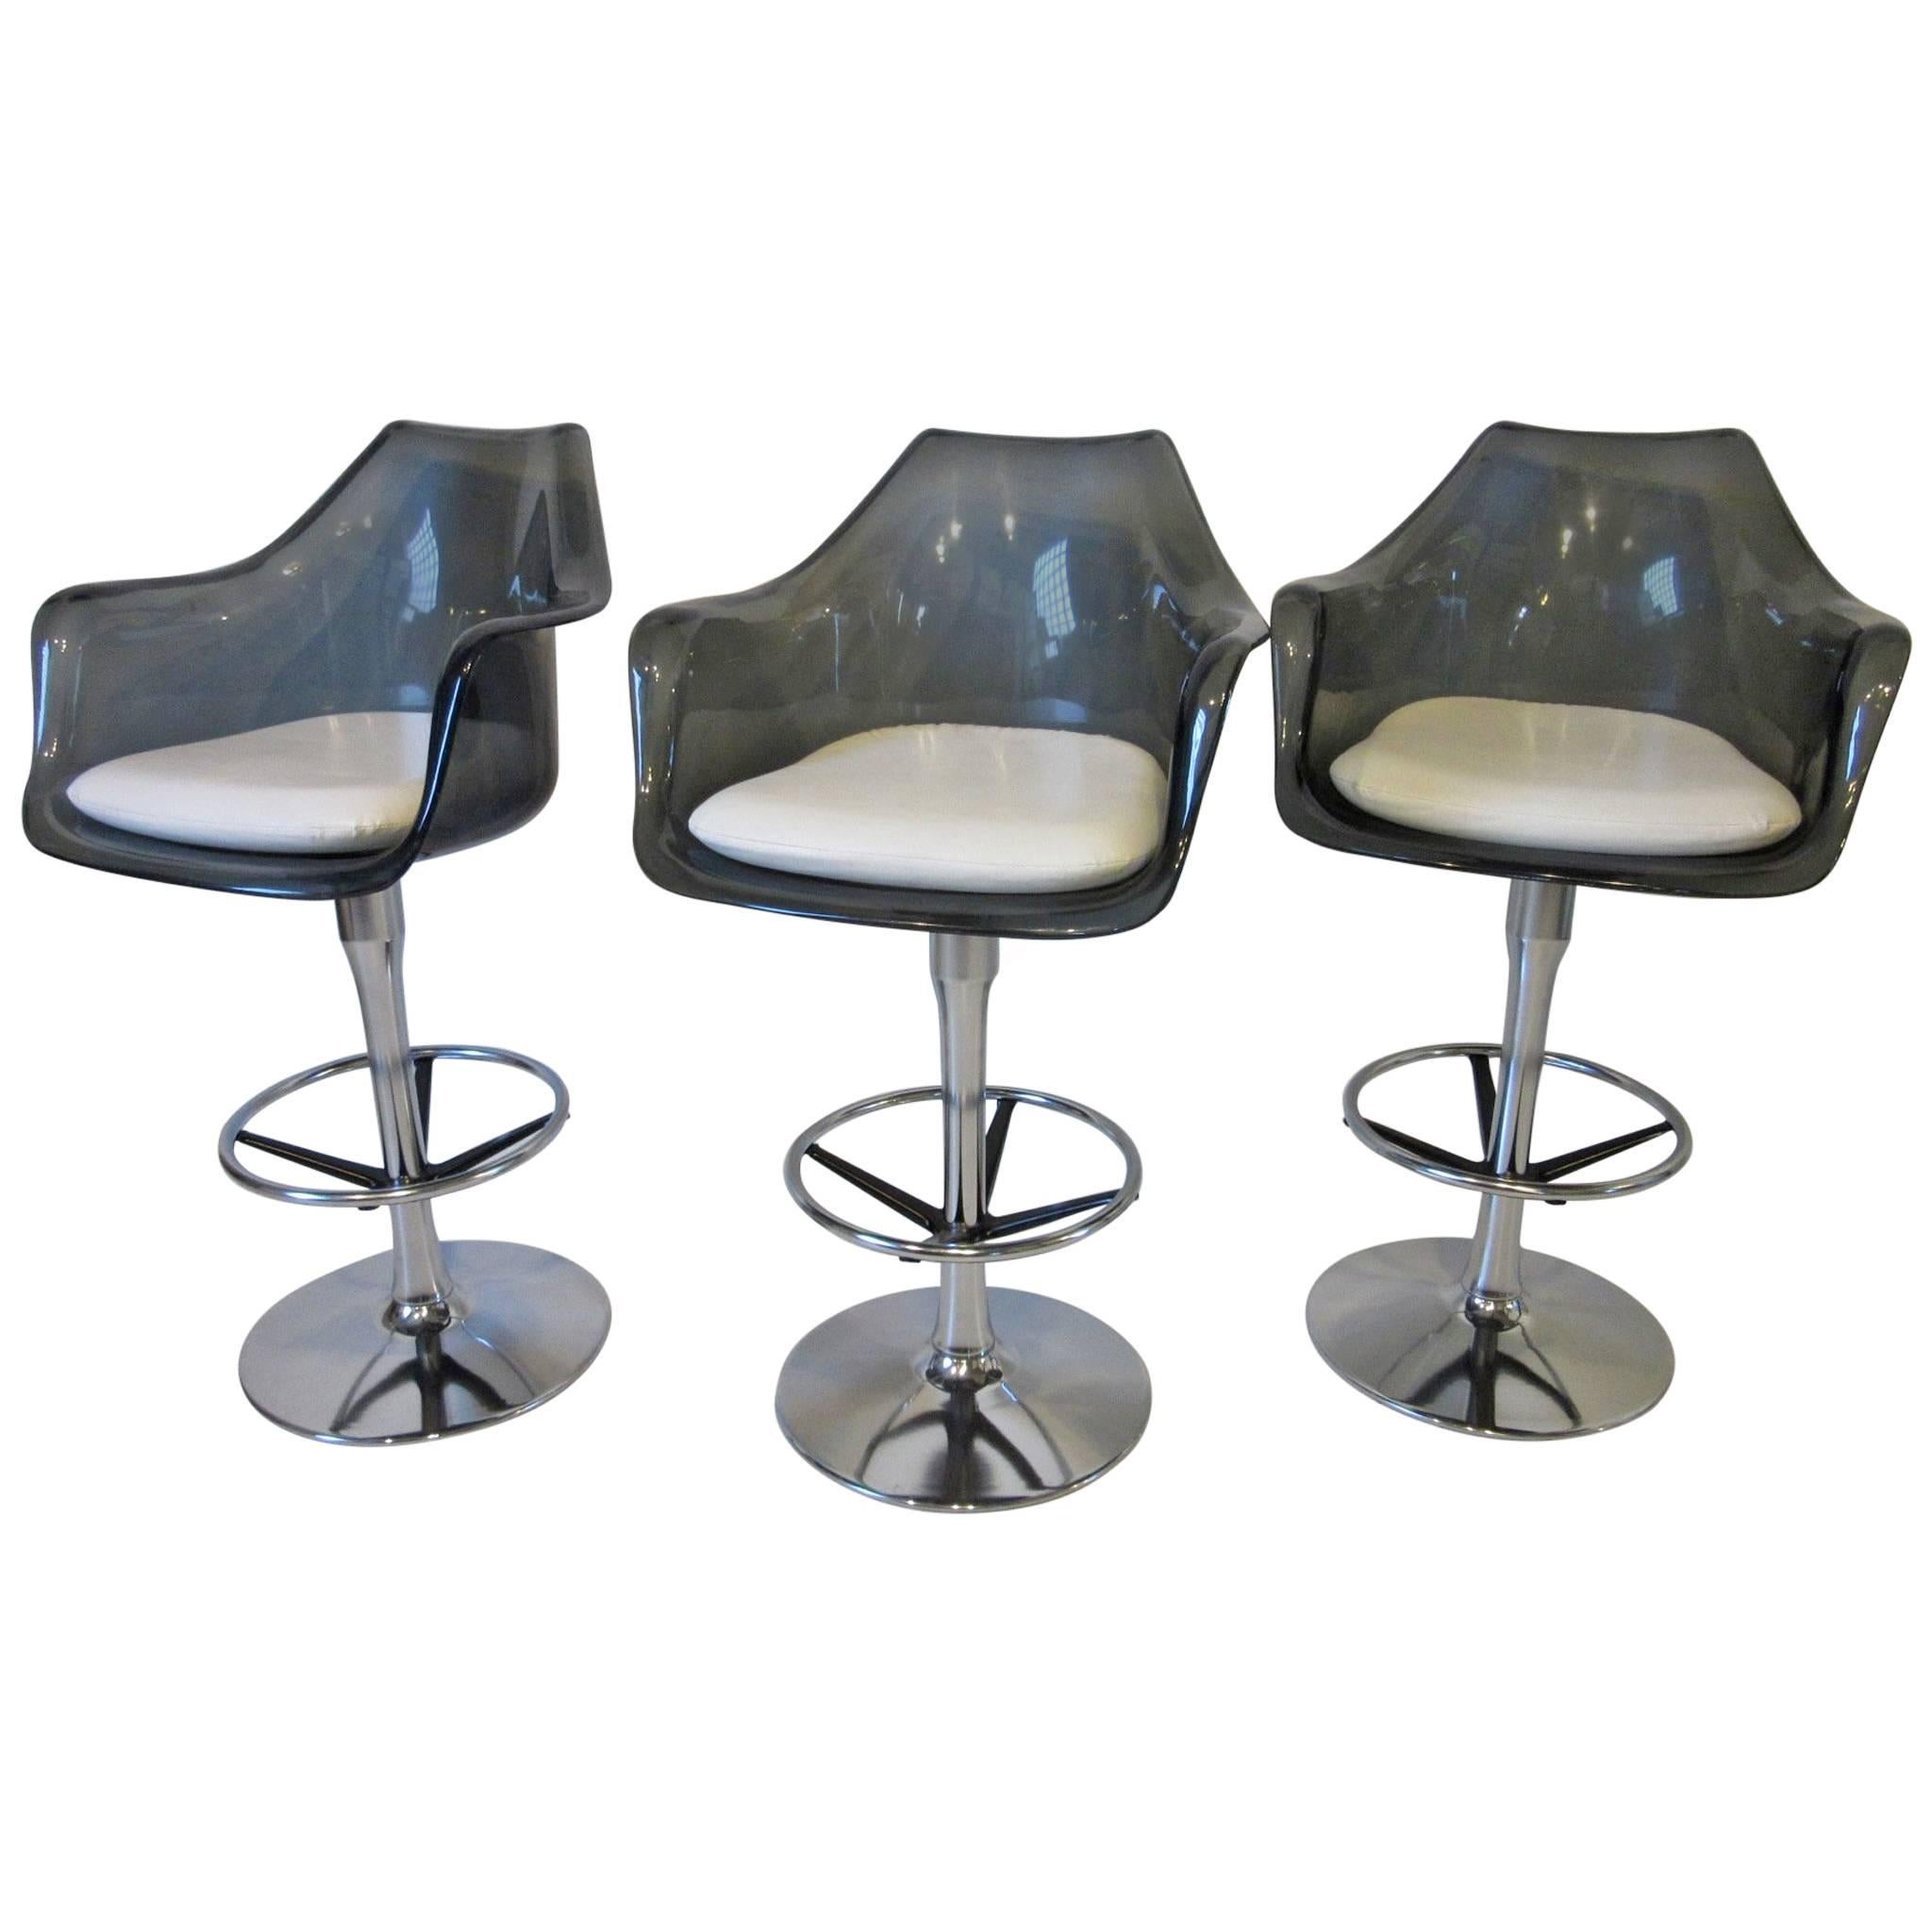 Smoked Lucite and Chrome Swiveling Bar Stools